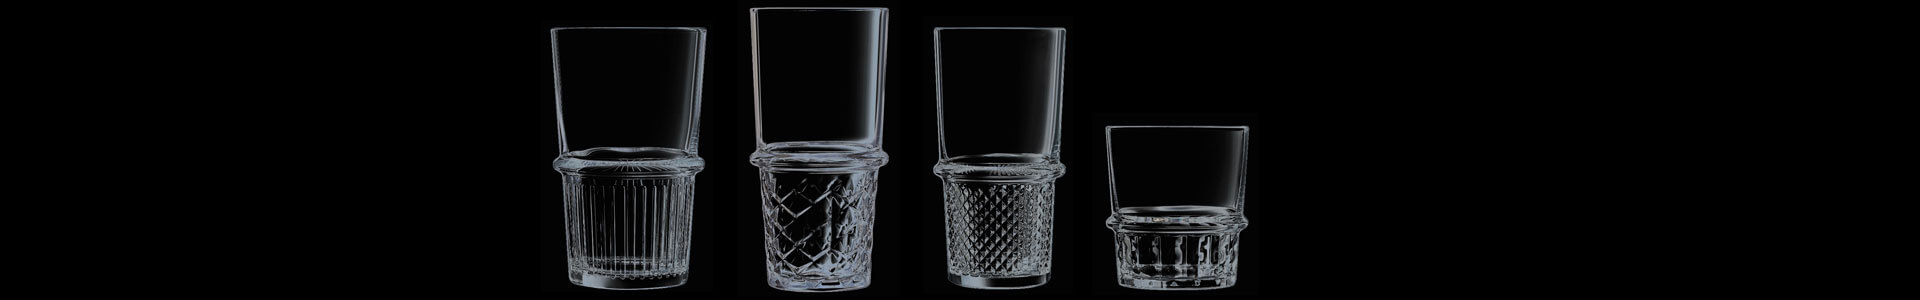 New York long drink glasses from Arcoroc against a black background.